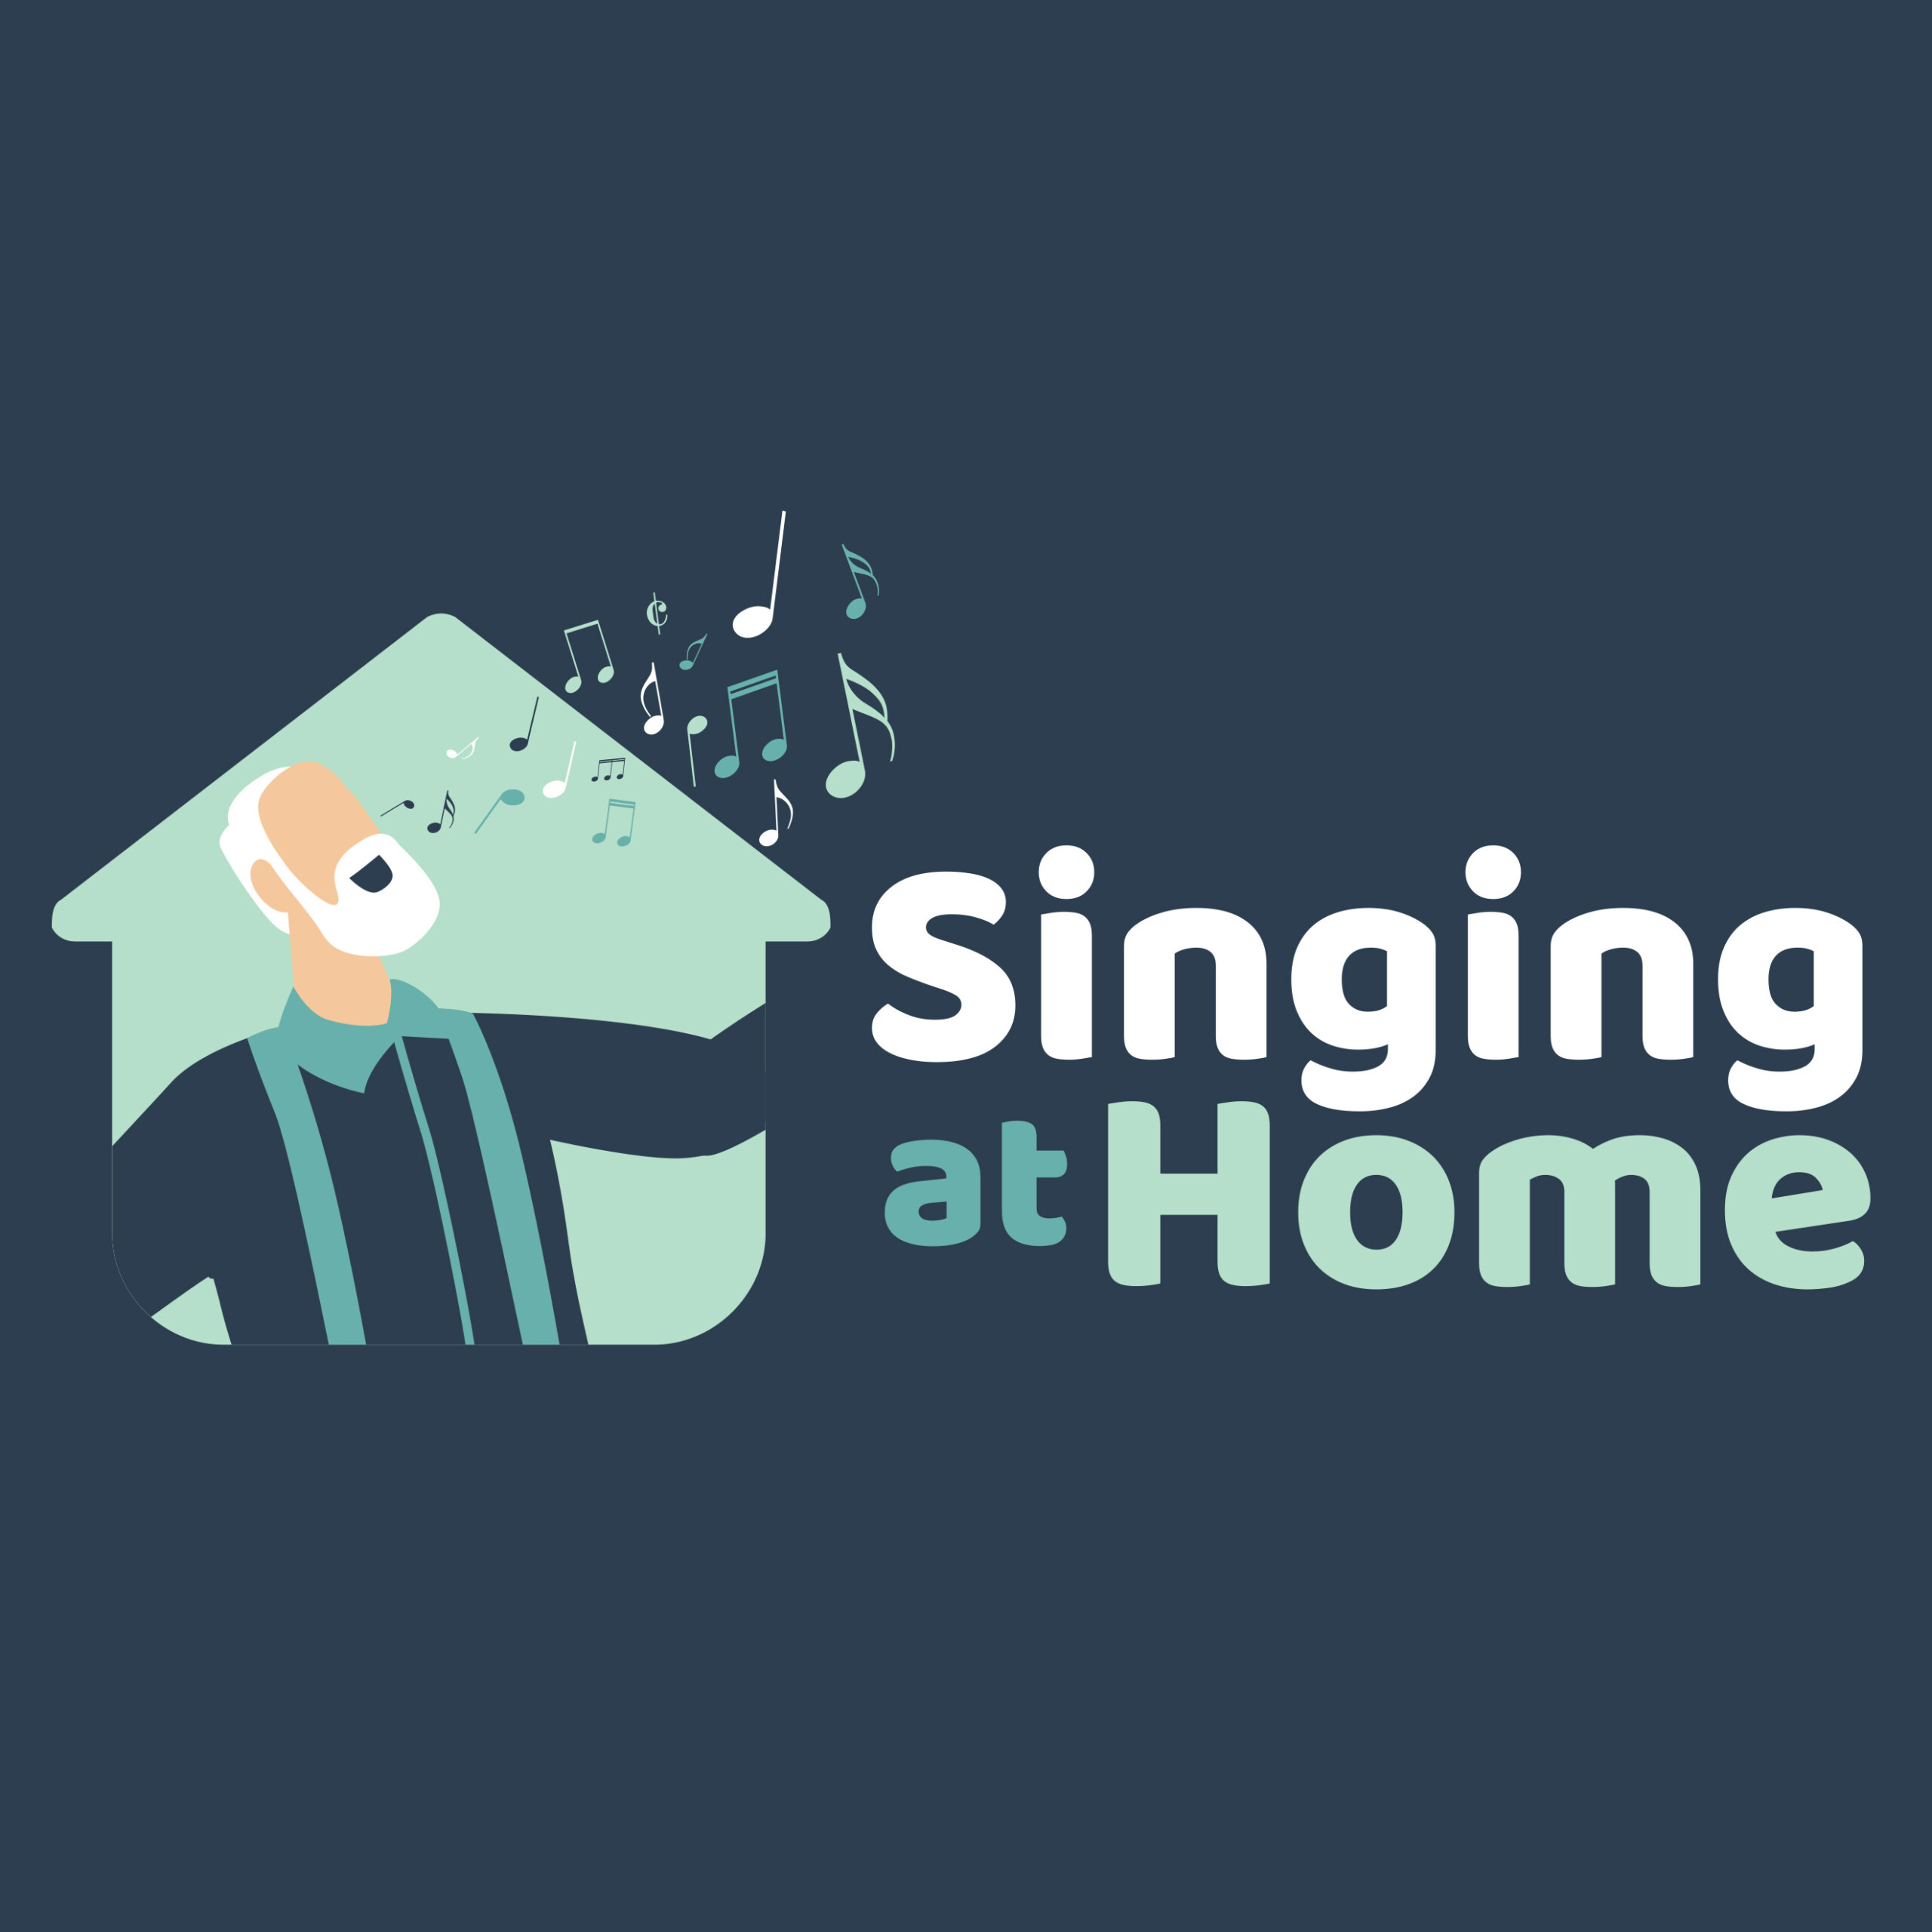 Singing at Home for Older Adults and Caregivers